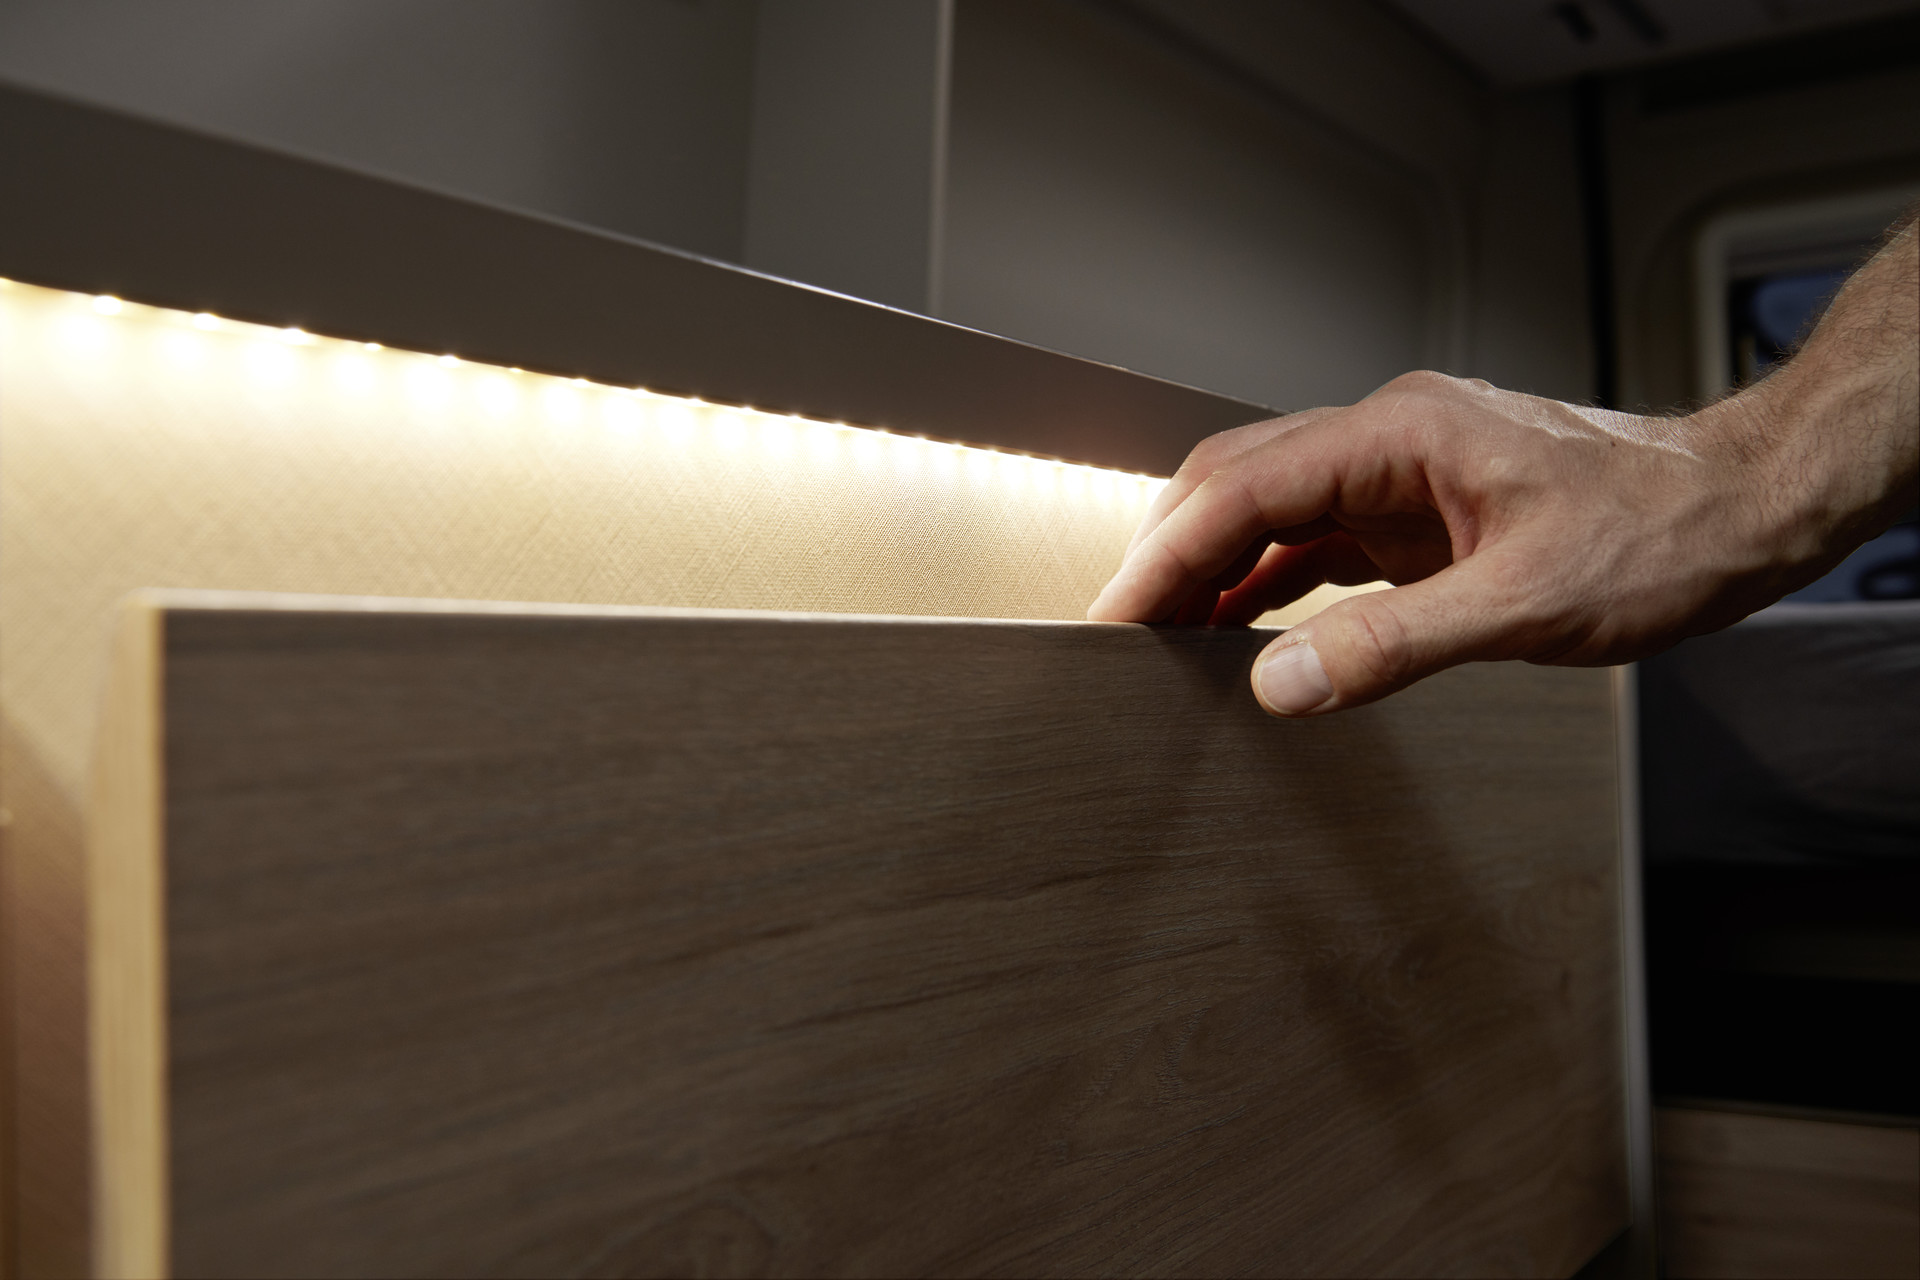 Indirect lighting creates light in the drawer and creates a warm ambiance at the same time.